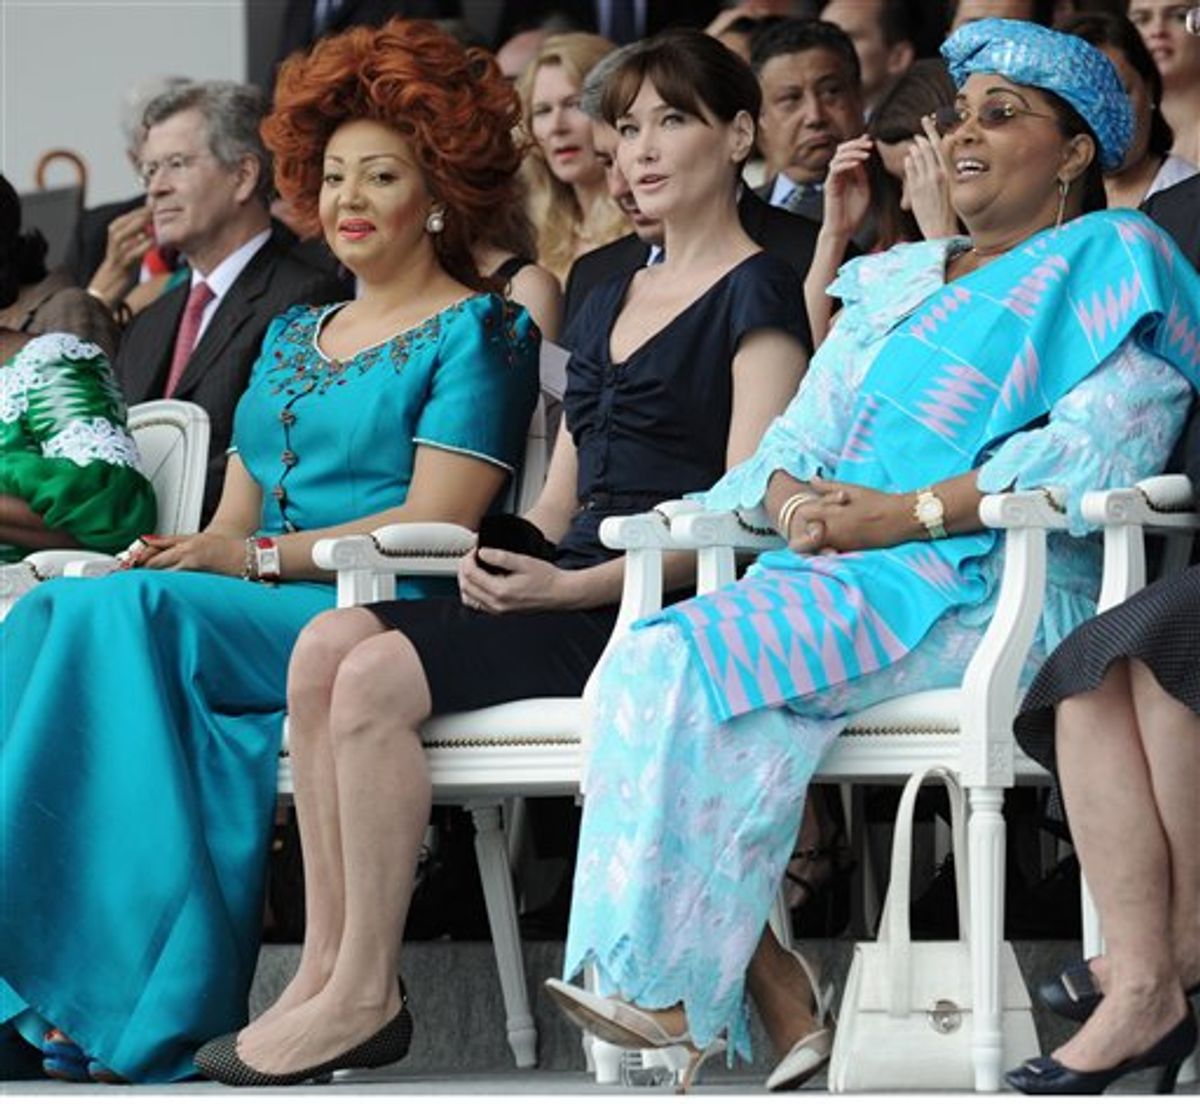 France First lady Carla Bruni-Sarkozy, center, flanked by Cameroon first lady Chantal Biya, left, and Burkina Faso's Chantal Compaore attend the annual Bastille Day military parade in Paris, Wednesday, July 14, 2010.  (AP Photo/Eric Feferberg, Pool)         (AP)